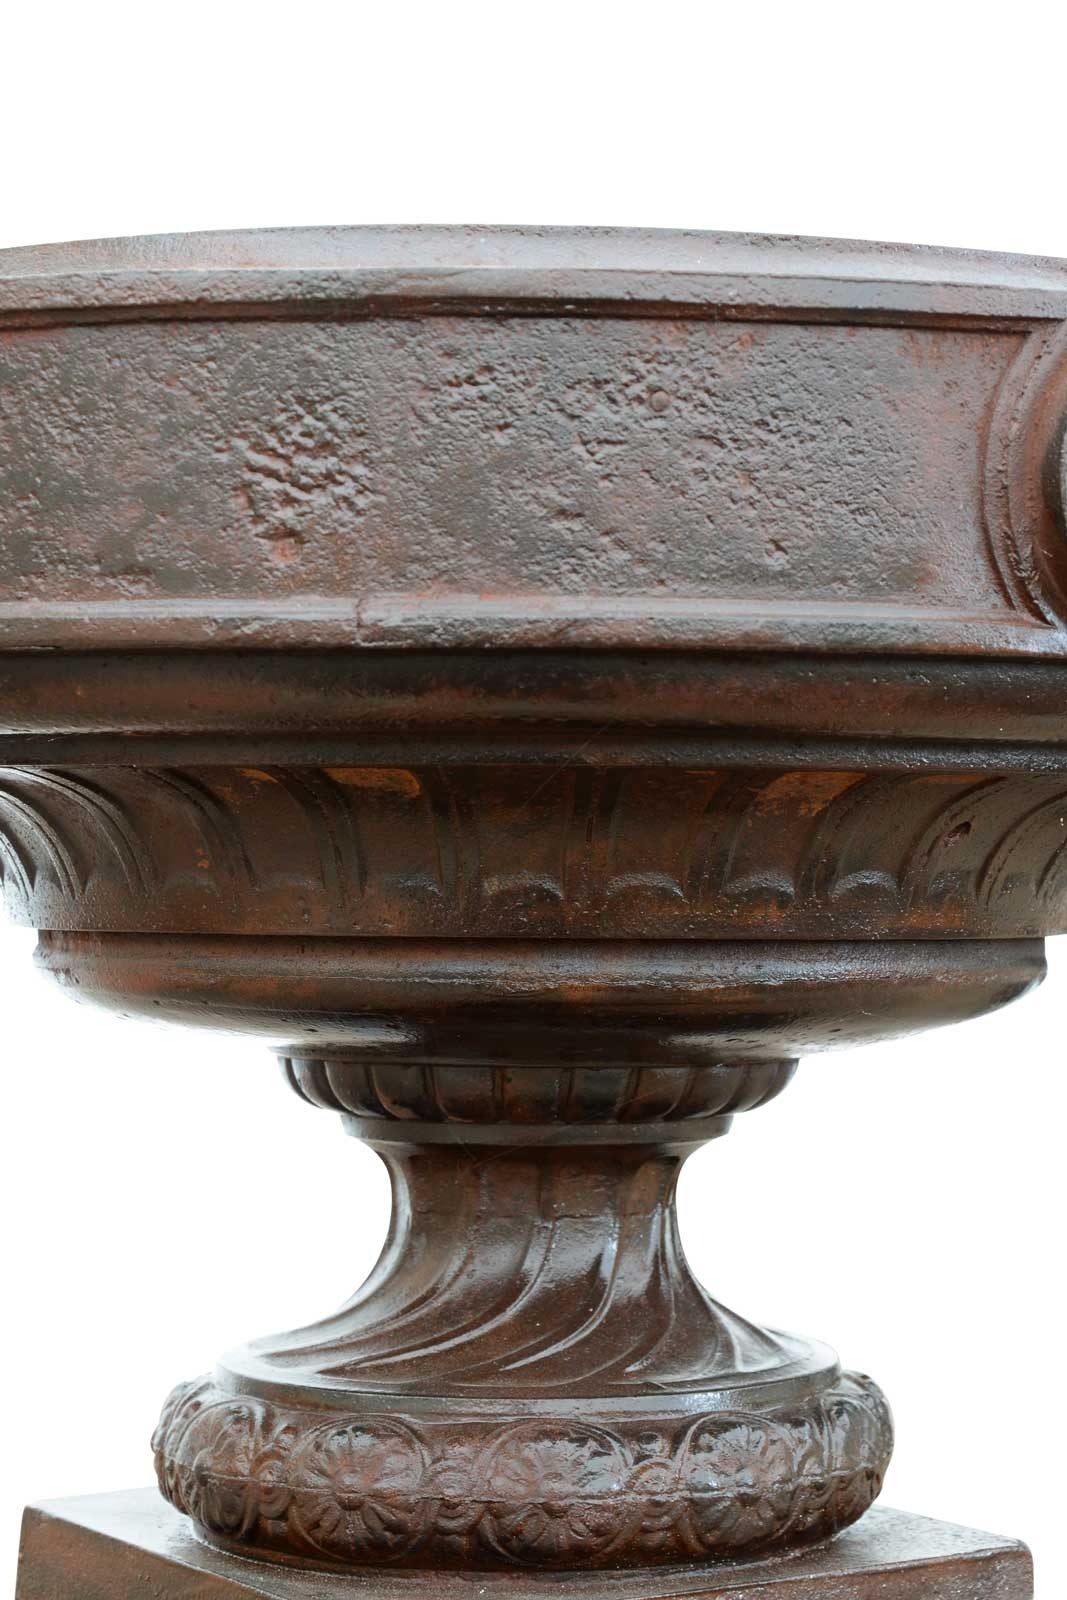 Dating from the late 19th century, pair of cast iron vase with rosettes decorations upper part and gadroons lower part. Base: 8 x 8 in.